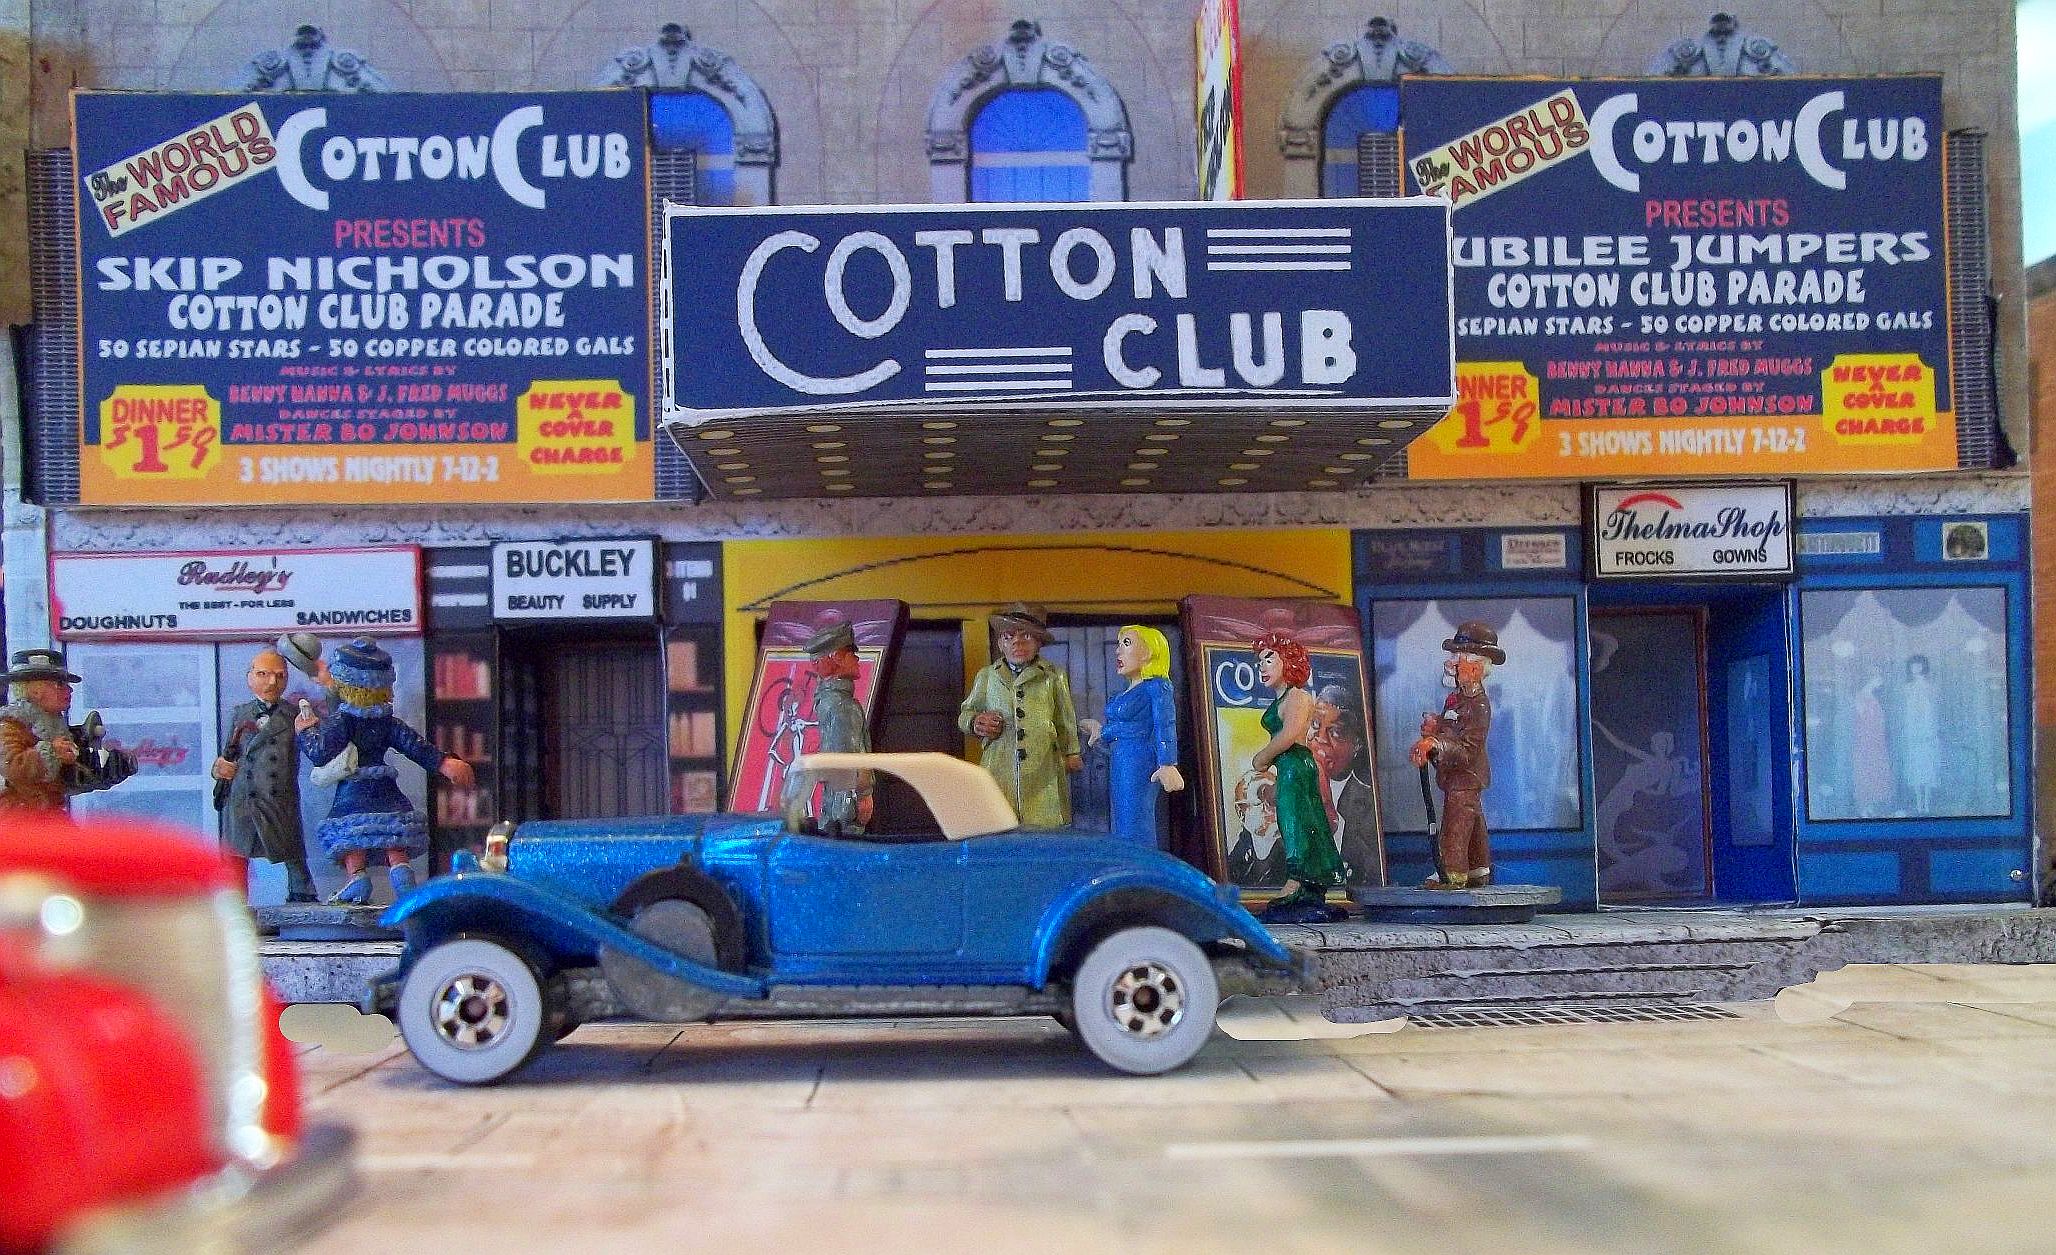 The Cotton Club Front